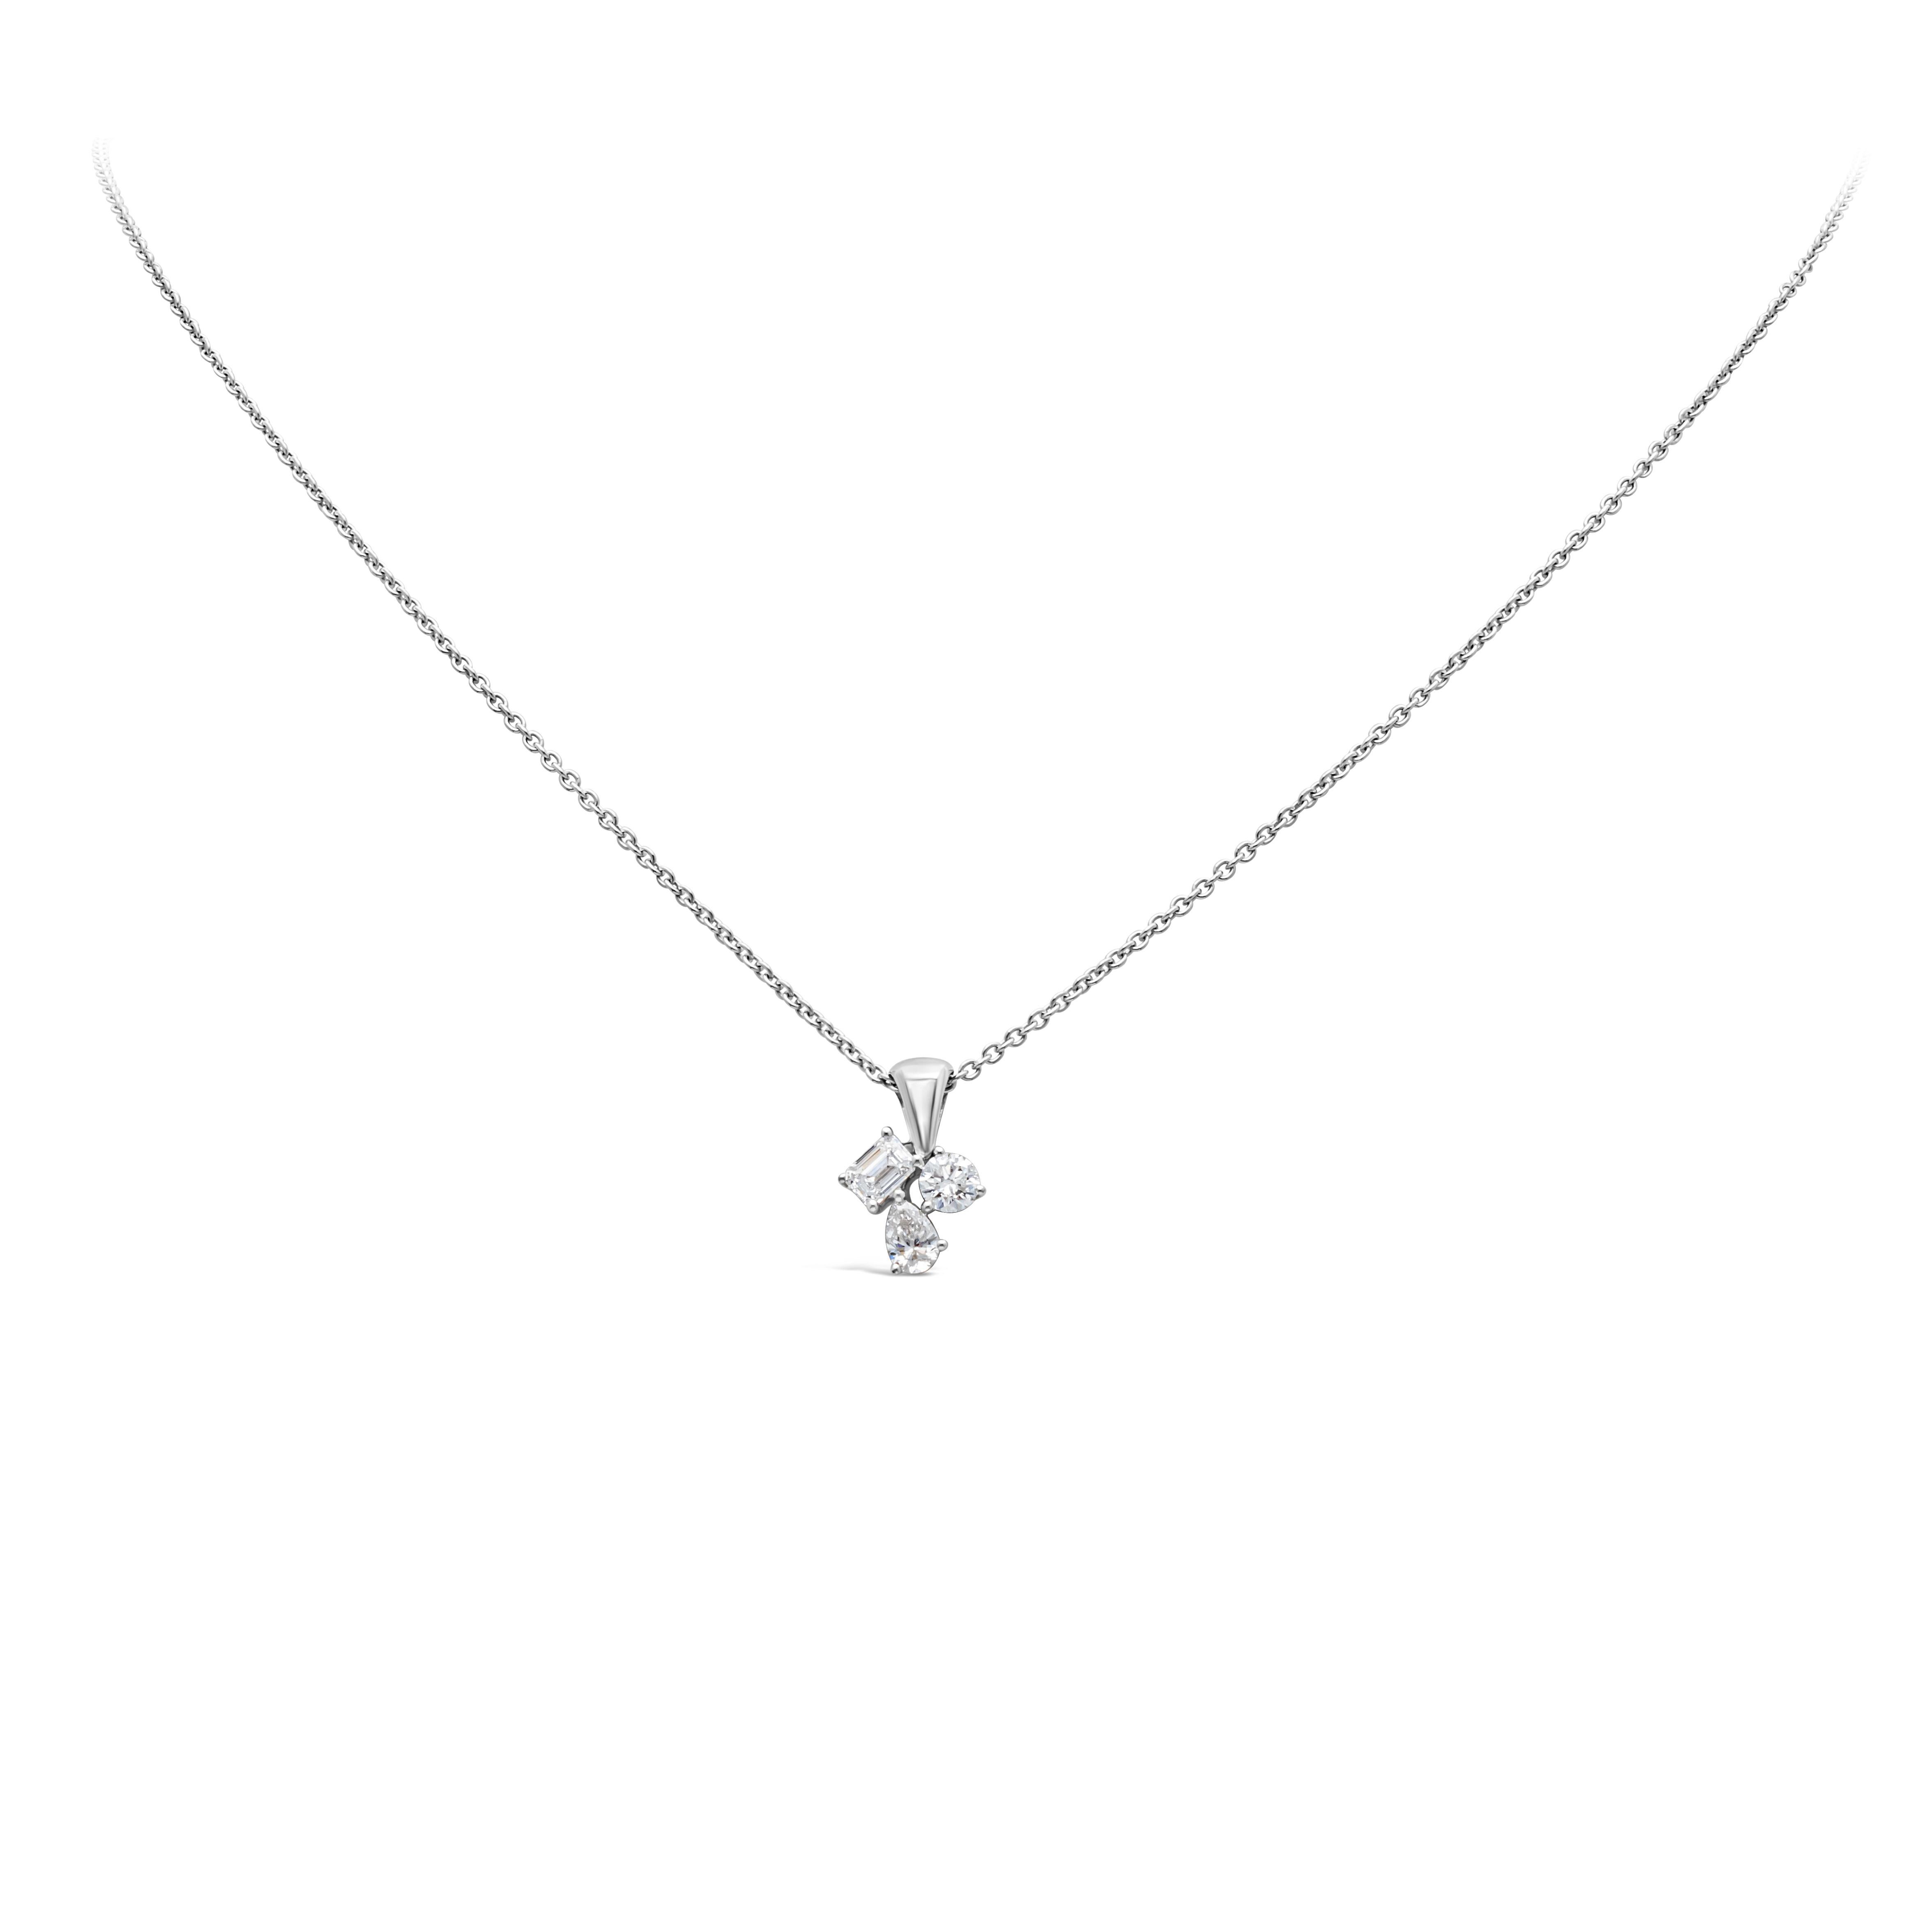 A simple pendant necklace showcasing pear, round and emerald mixed-cut diamonds, set in a 18K White Gold. Diamonds weigh 0.60 carats total, F color and SI in clarity. Suspended on a 18 inches 14K White Gold chain. Perfect for your everyday